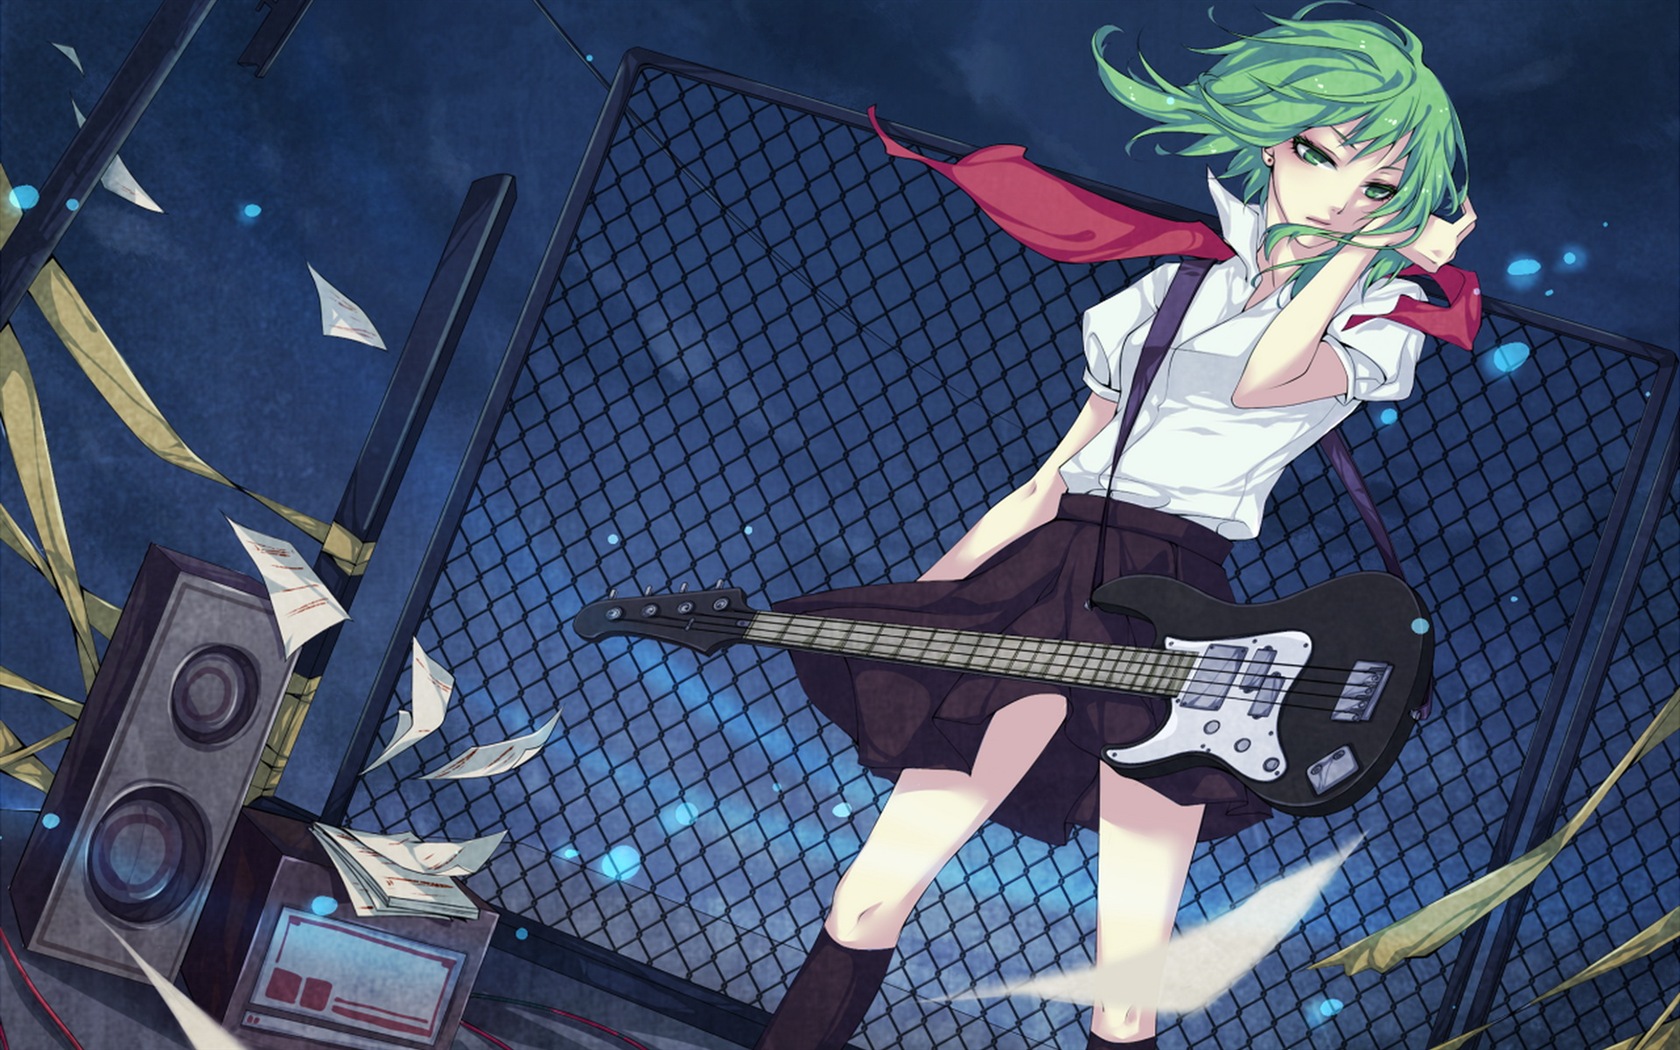 Musique guitare anime girl wallpapers HD #16 - 1680x1050